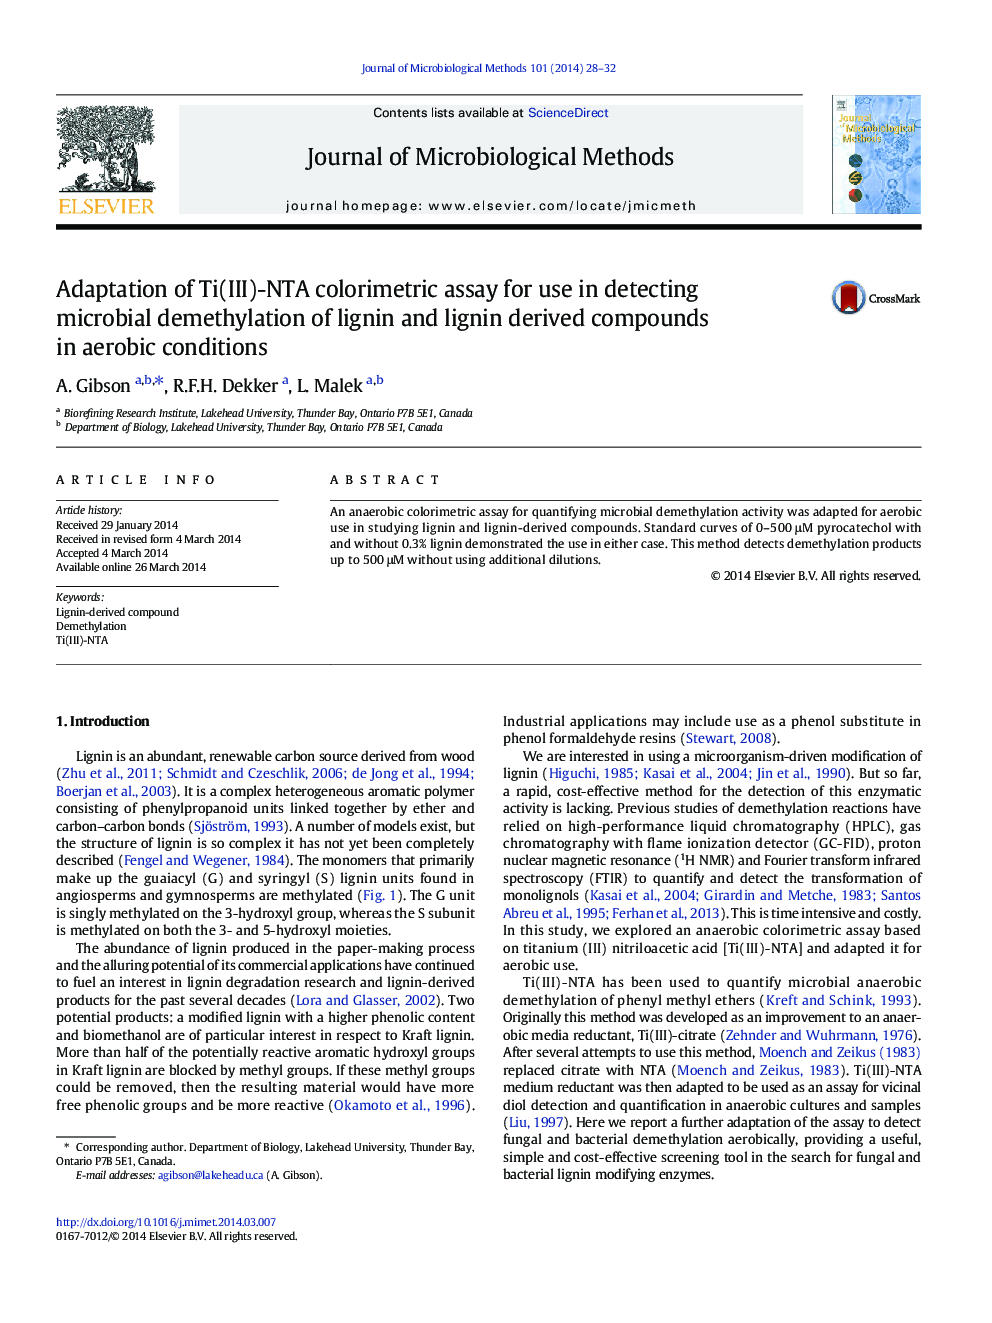 Adaptation of Ti(III)-NTA colorimetric assay for use in detecting microbial demethylation of lignin and lignin derived compounds in aerobic conditions